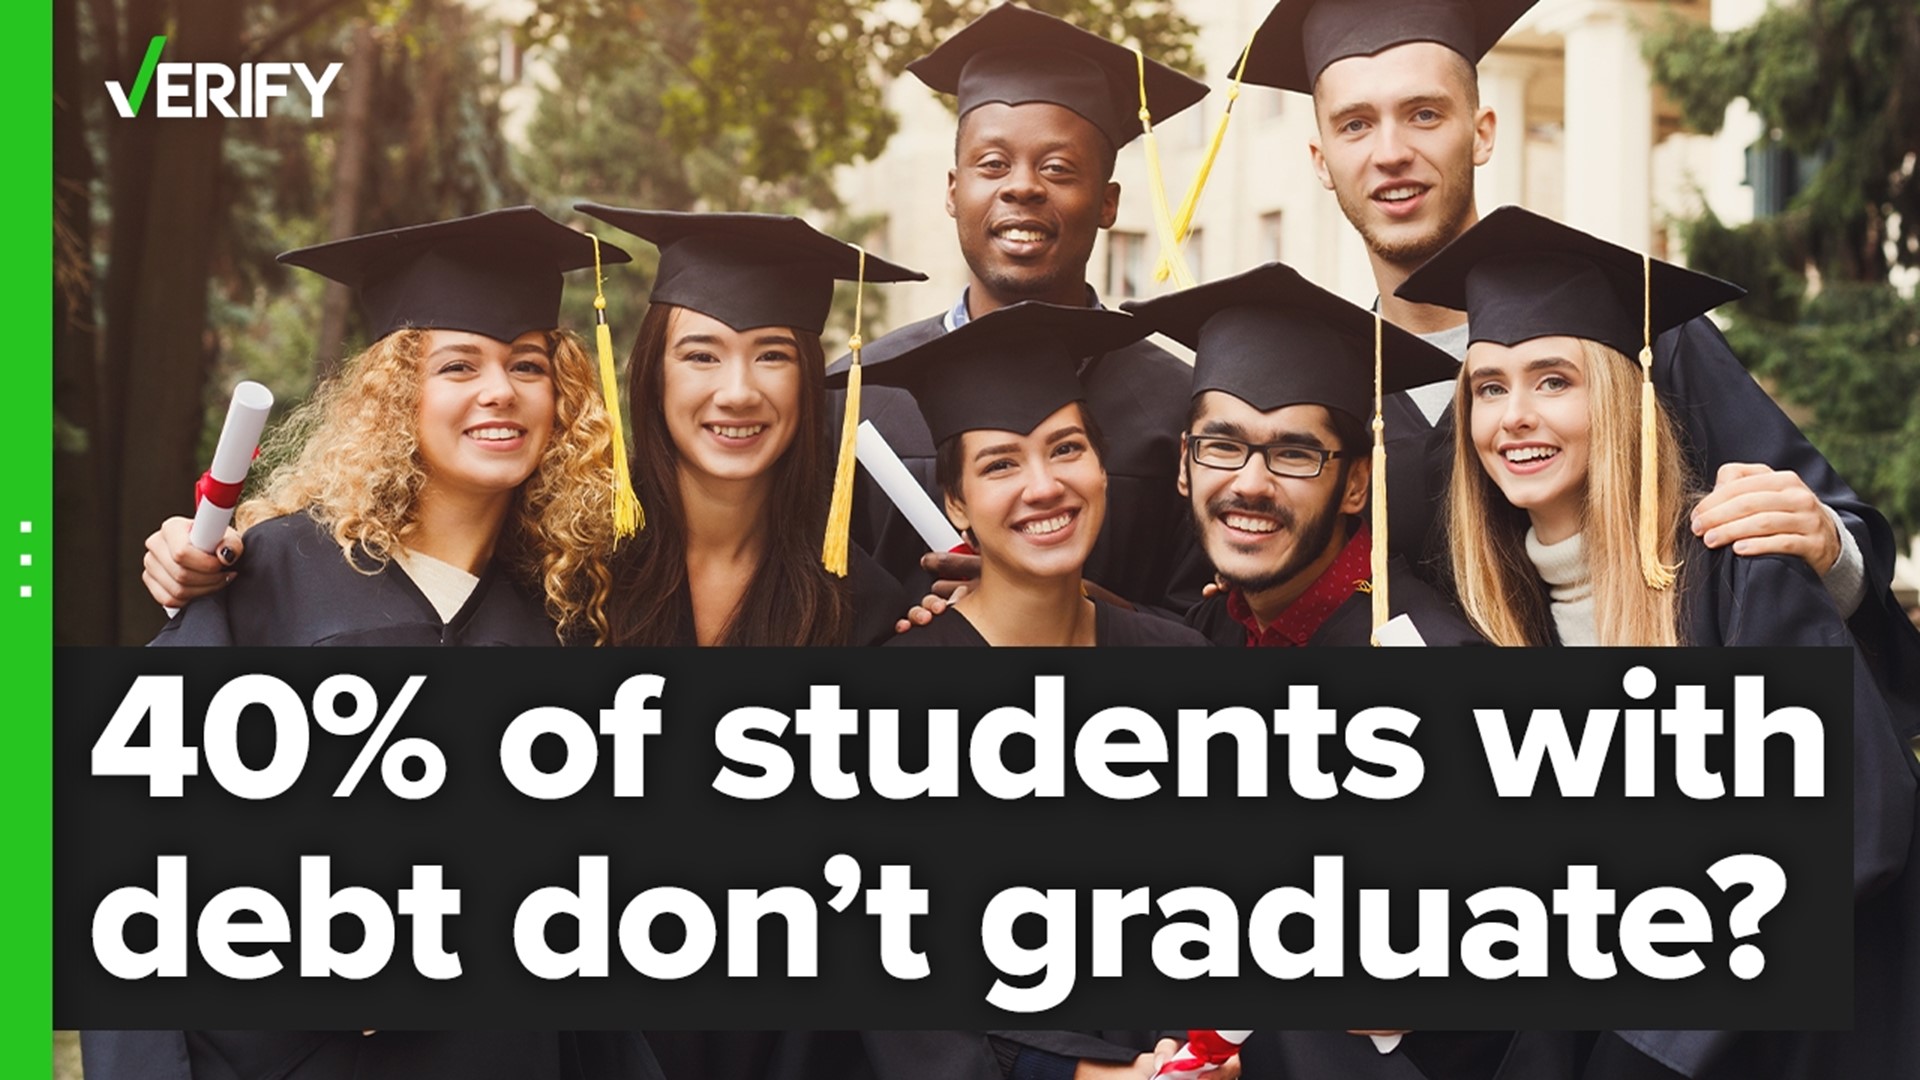 The claim is based on one study that looked at a small group of students, and there is no comprehensive data source that tracks student borrower graduation rates.